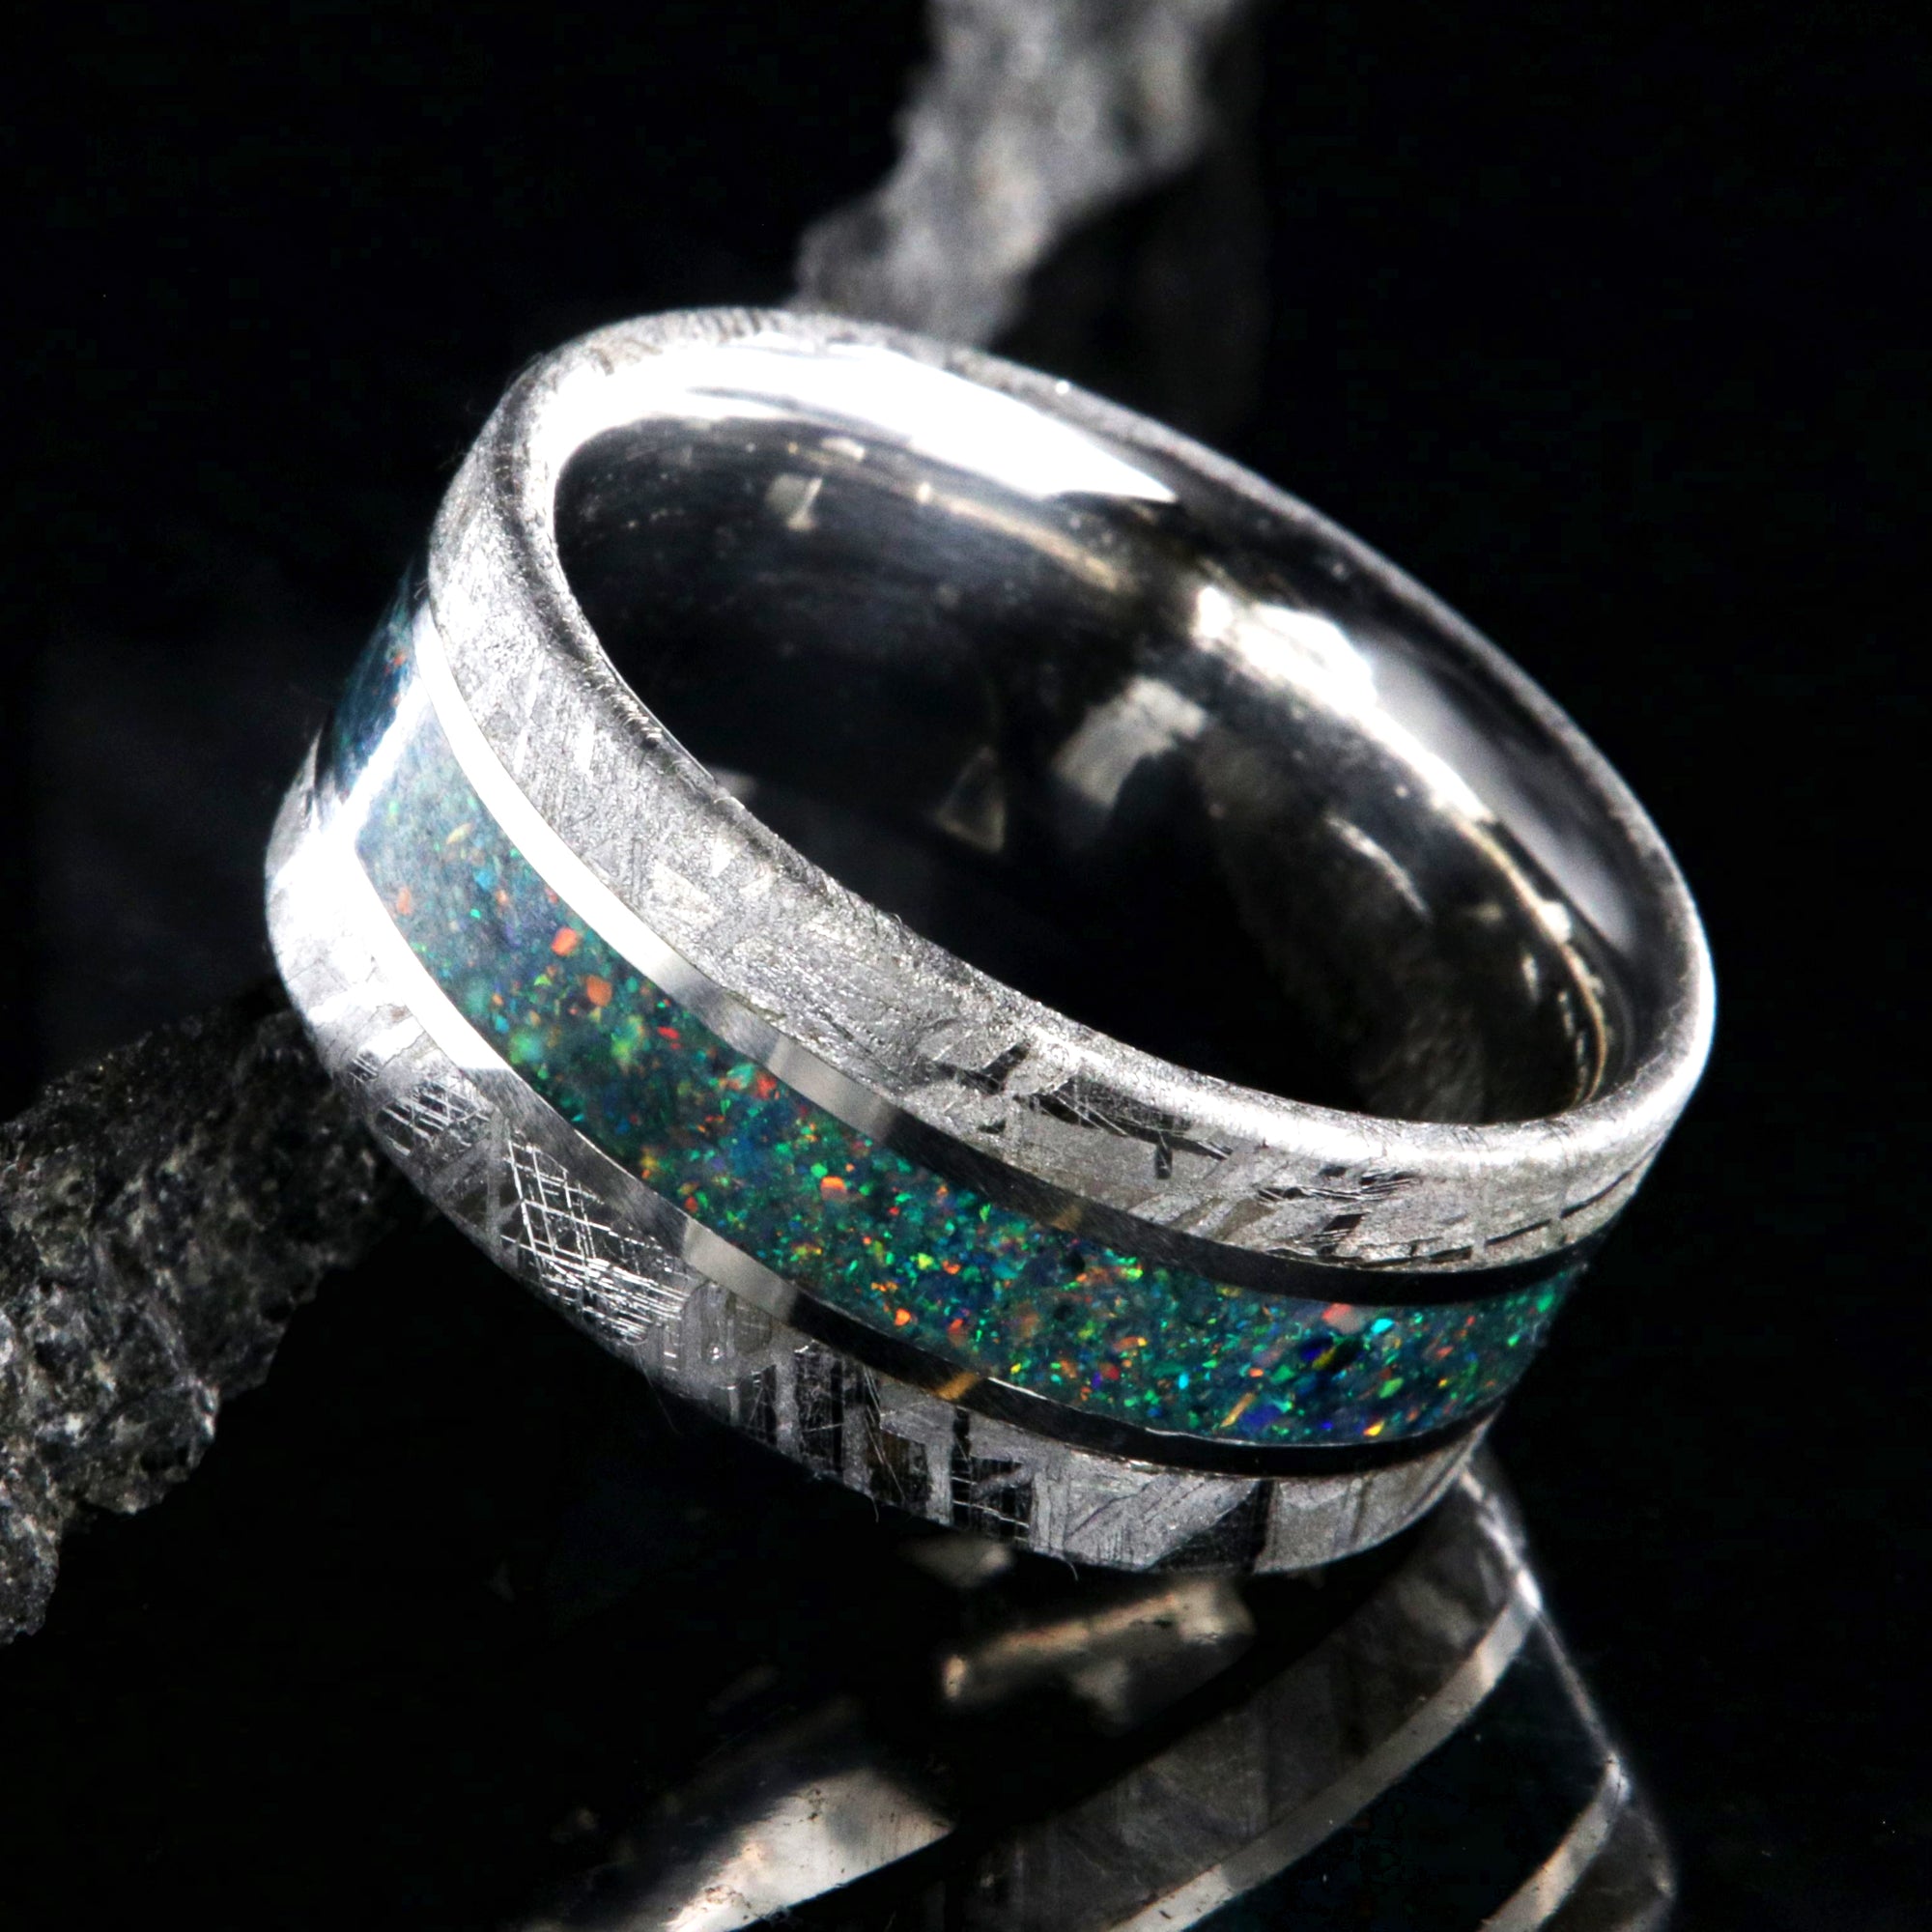 10mm wide cobalt men's wedding ring with Gibeon meteorite edges and a glacial opal inlay